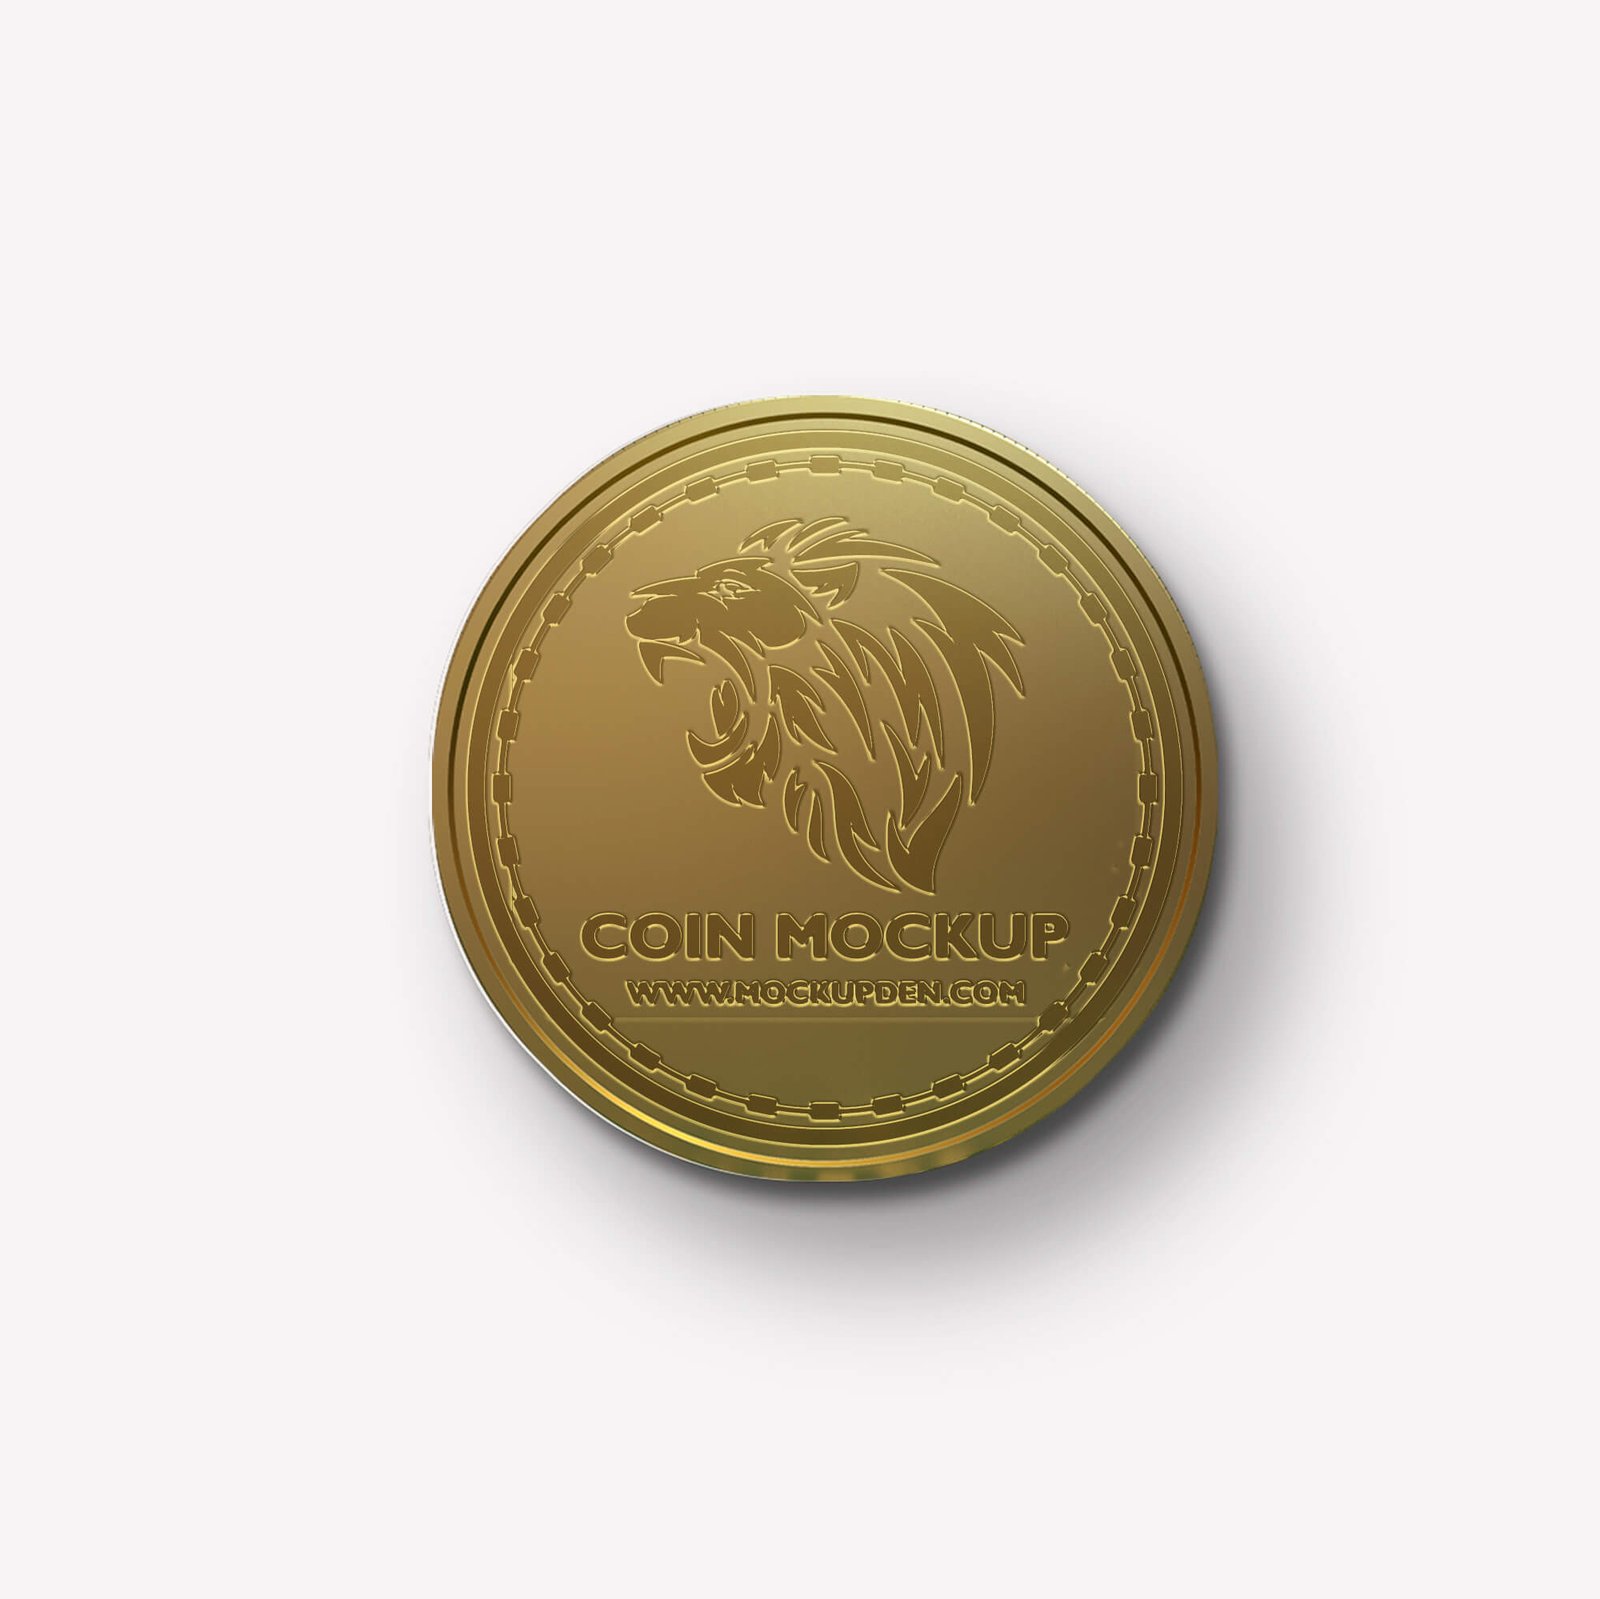 Design Free Coin MockUp PSD Template